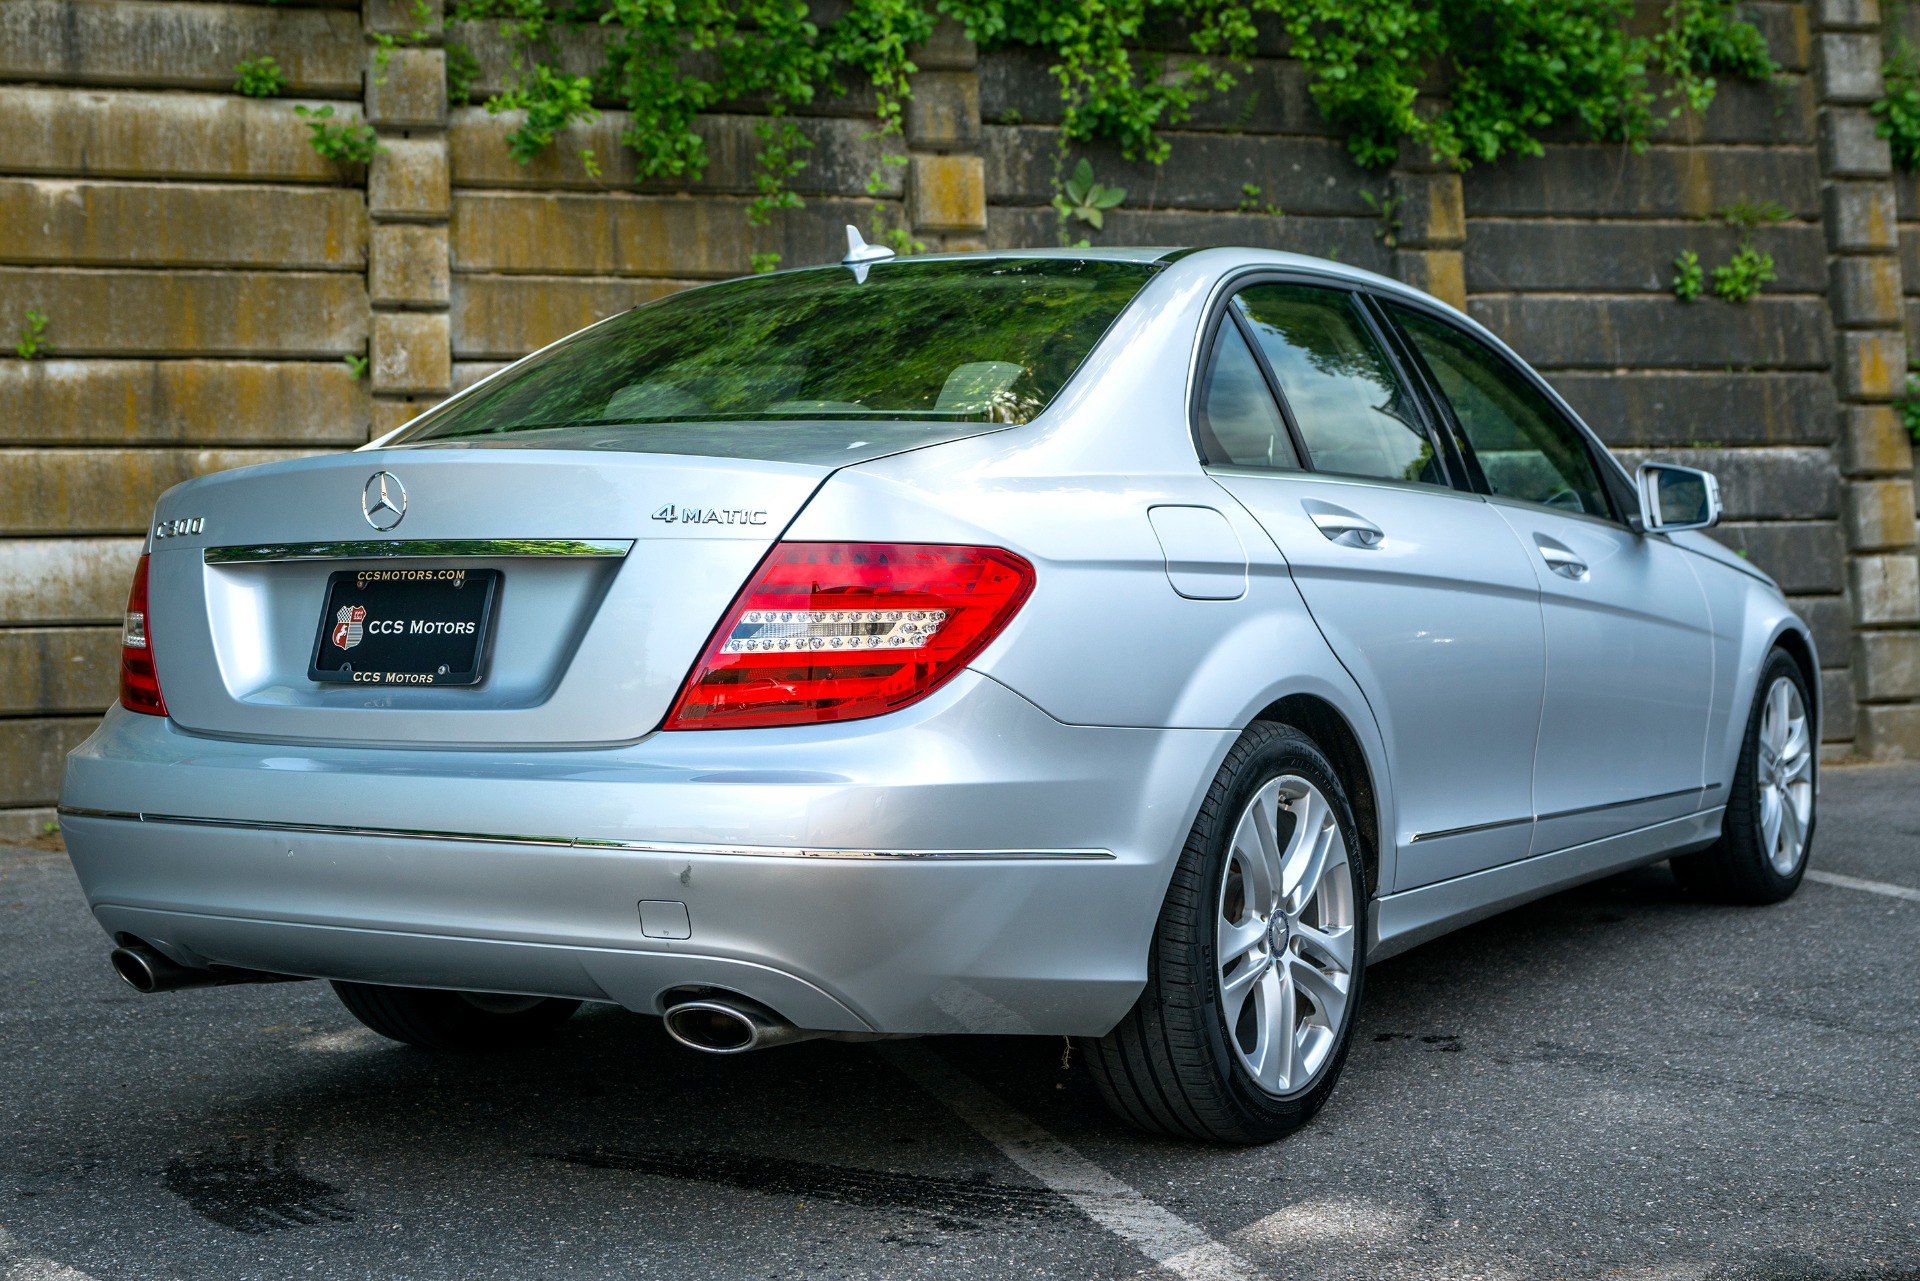 2012 Mercedes-Benz C-CLASS C 300 Luxury 4MATIC Stock # 1535 for sale near Oyster Bay, NY | NY ...